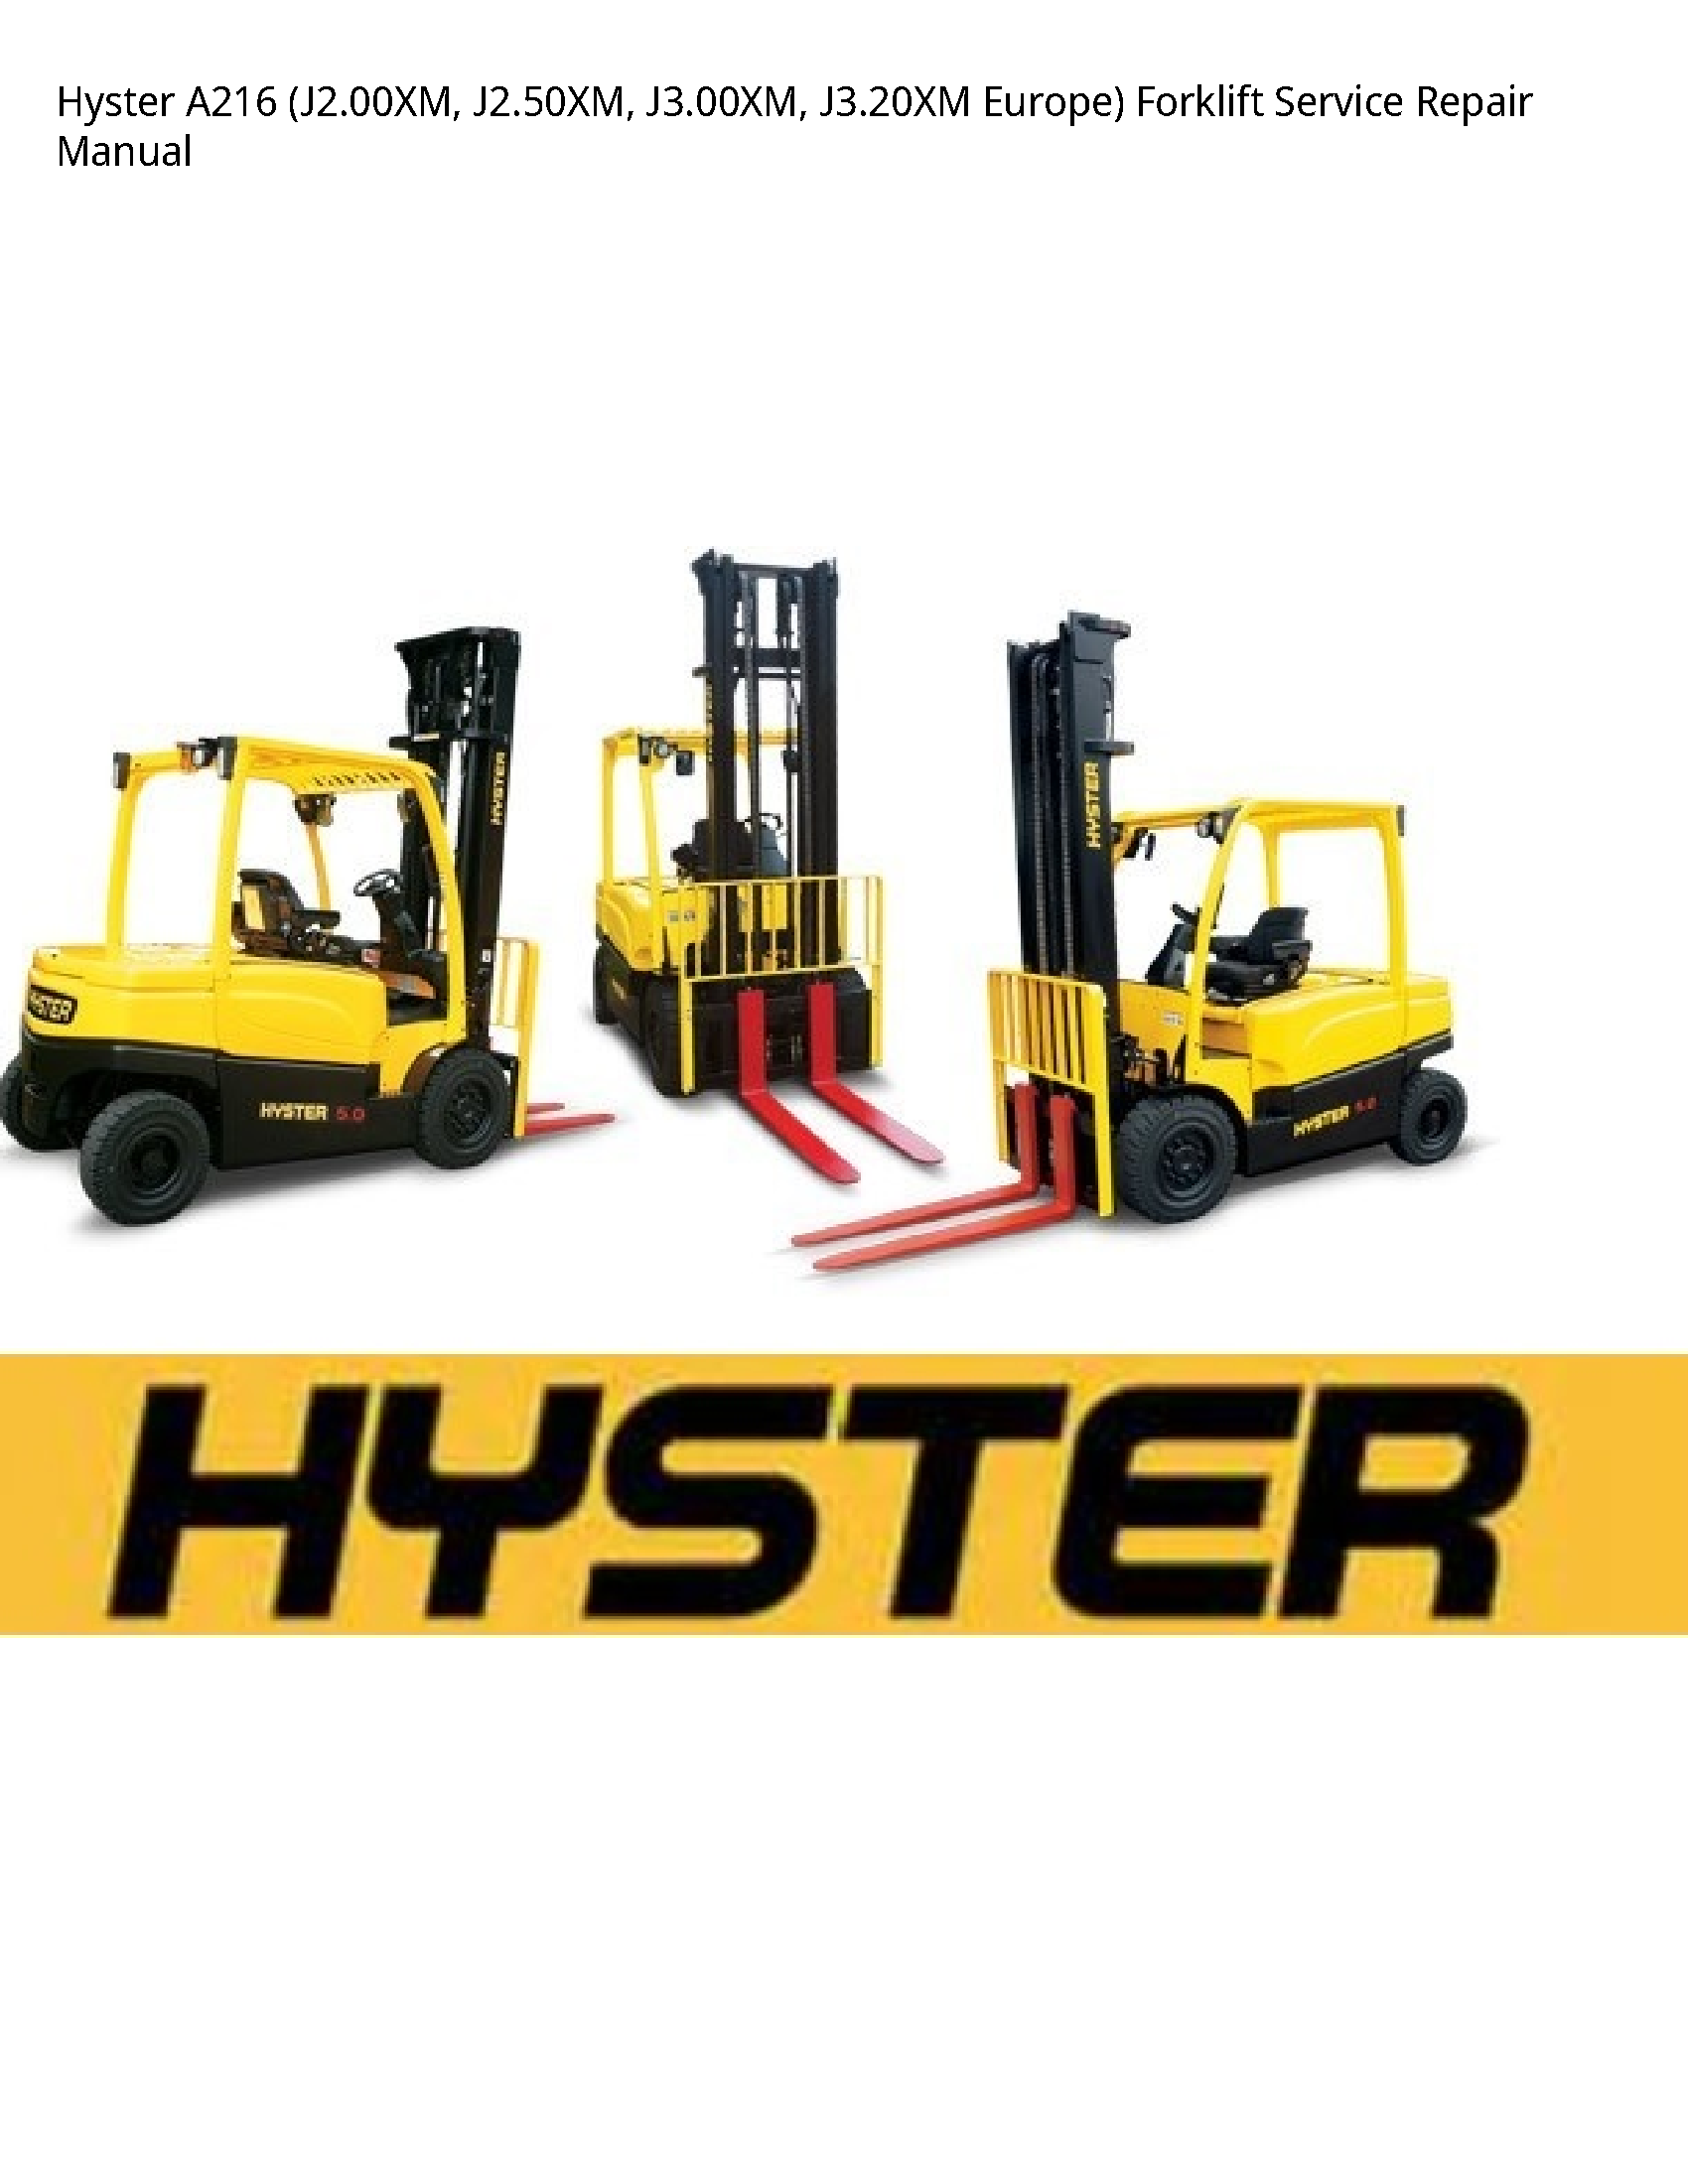 Hyster A216 Europe) Forklift manual